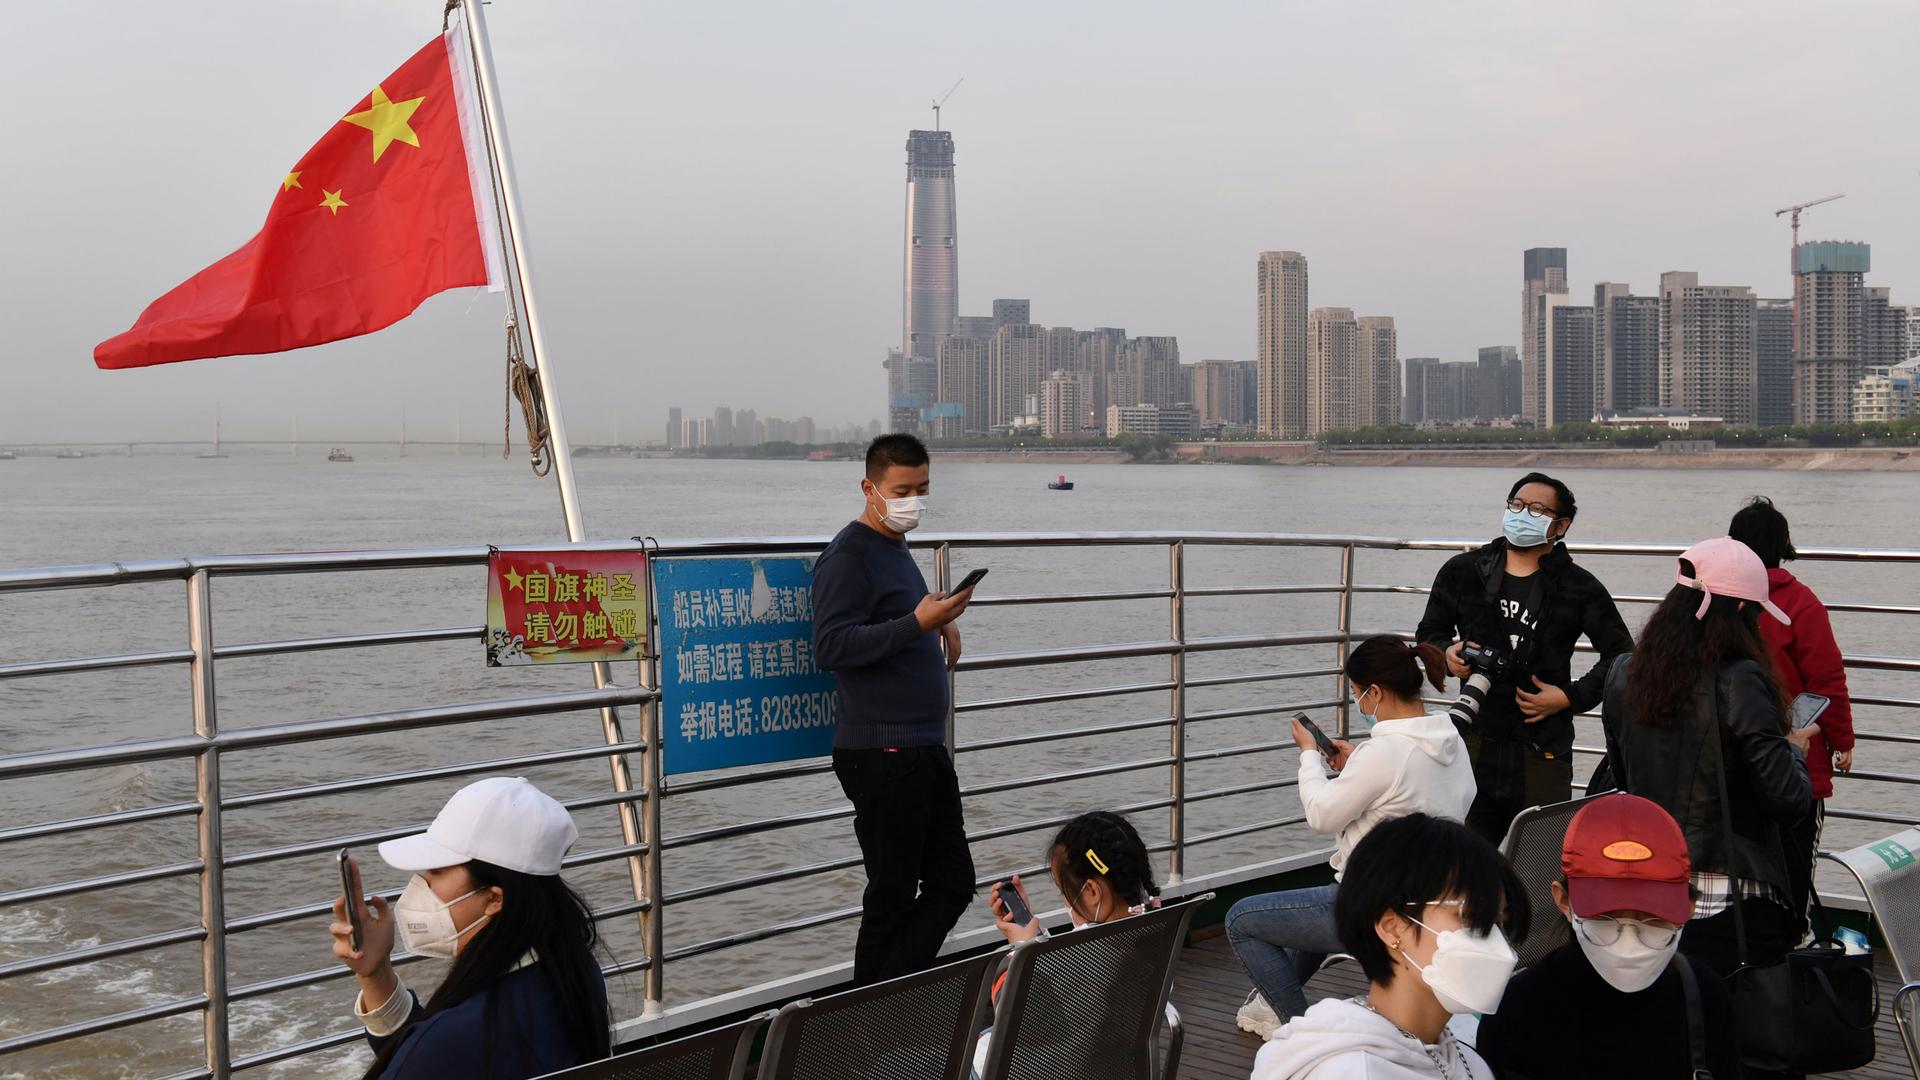 People in face masks ride on a ferry with a Chinese flag